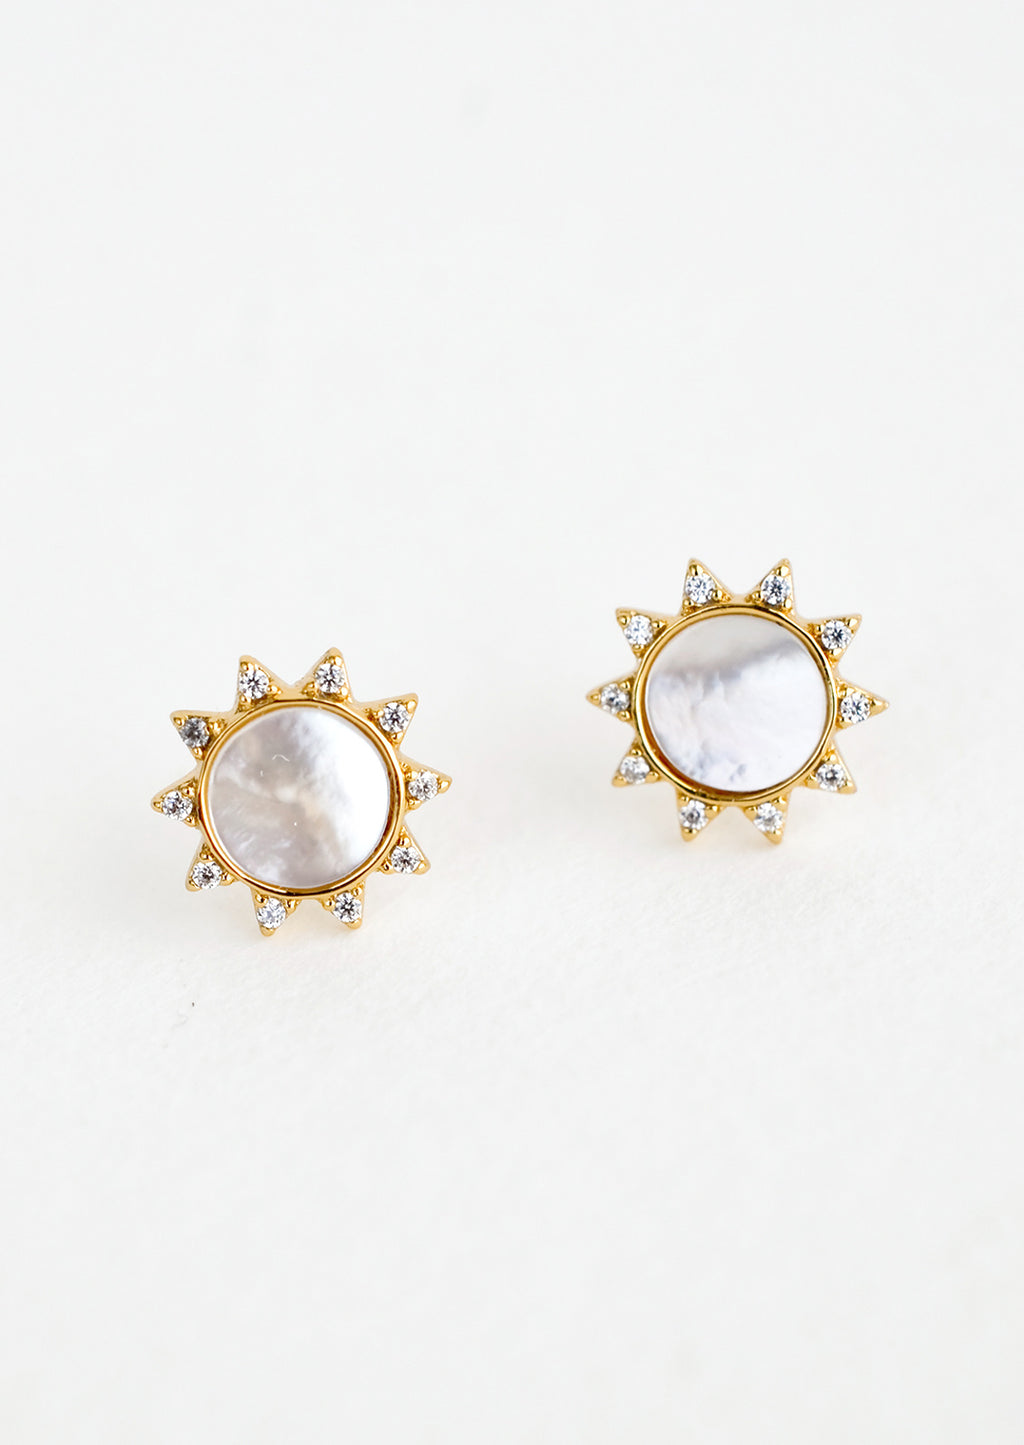 Mother of Pearl: A pair of gold stud earrings in the shape of a sun with shell inlay center and crystal "sunray" border.